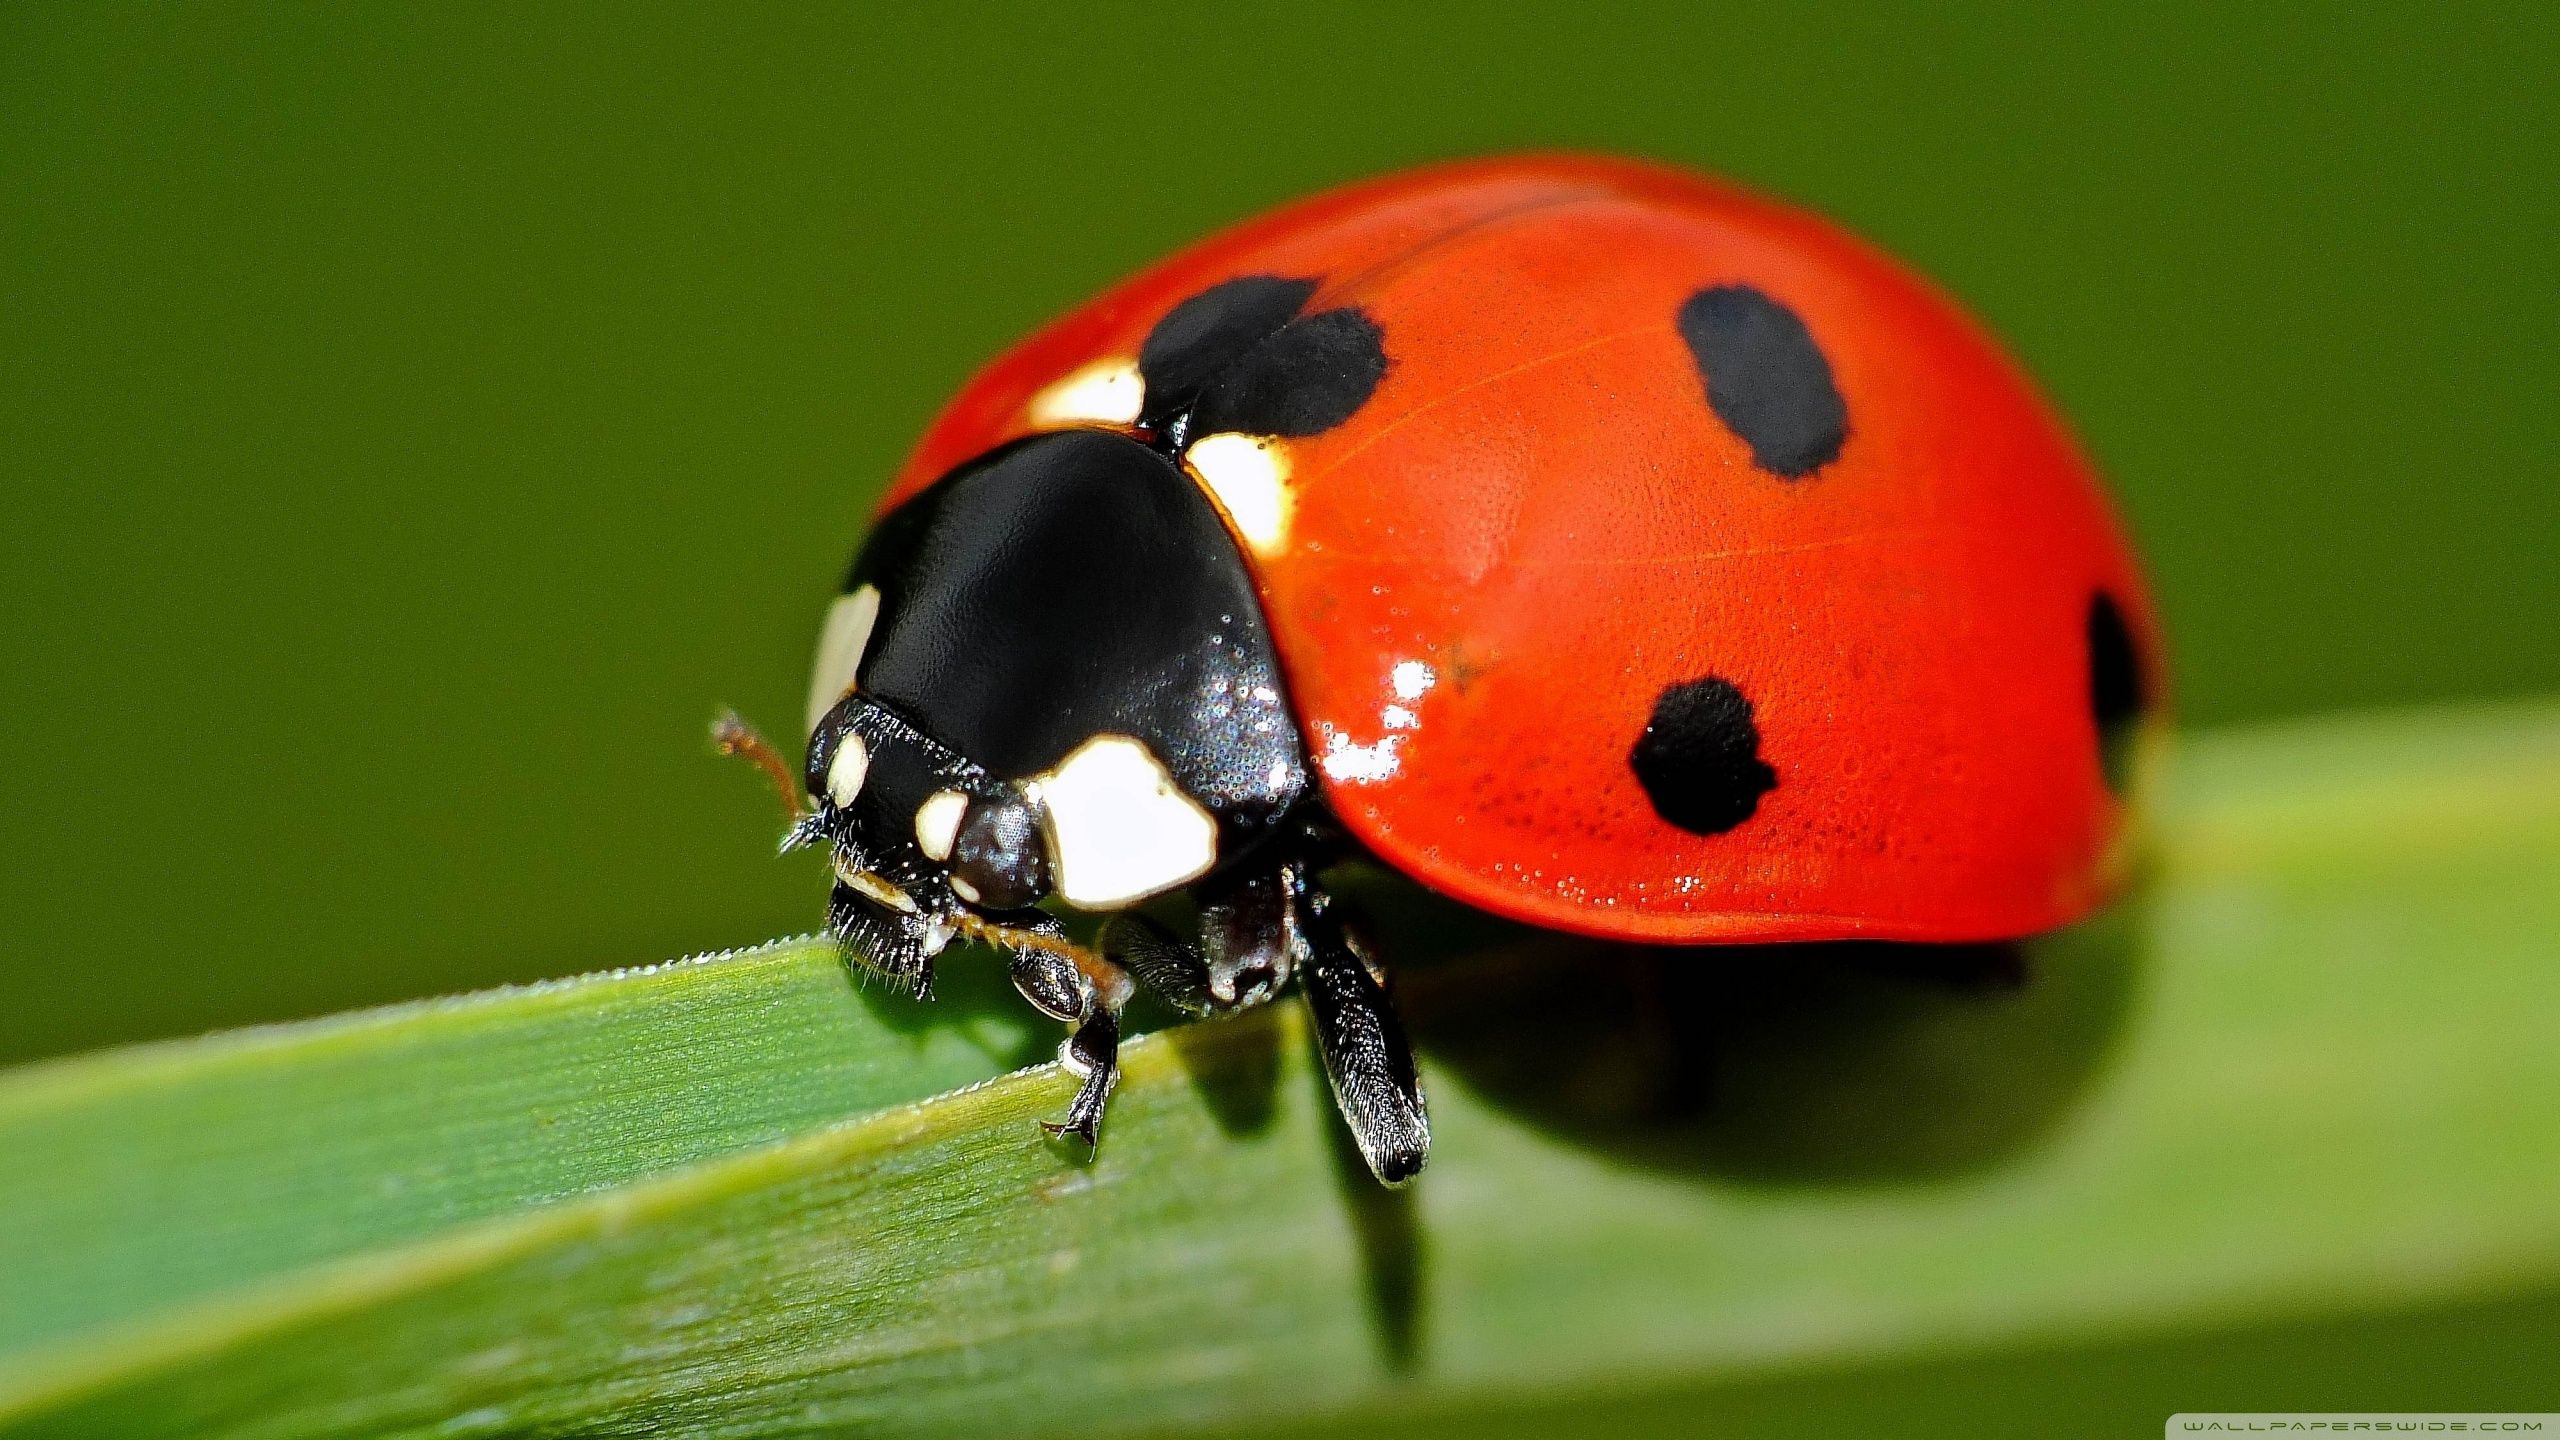 Adorable Ladybird Image HD Quality Best Games Wallpaper In